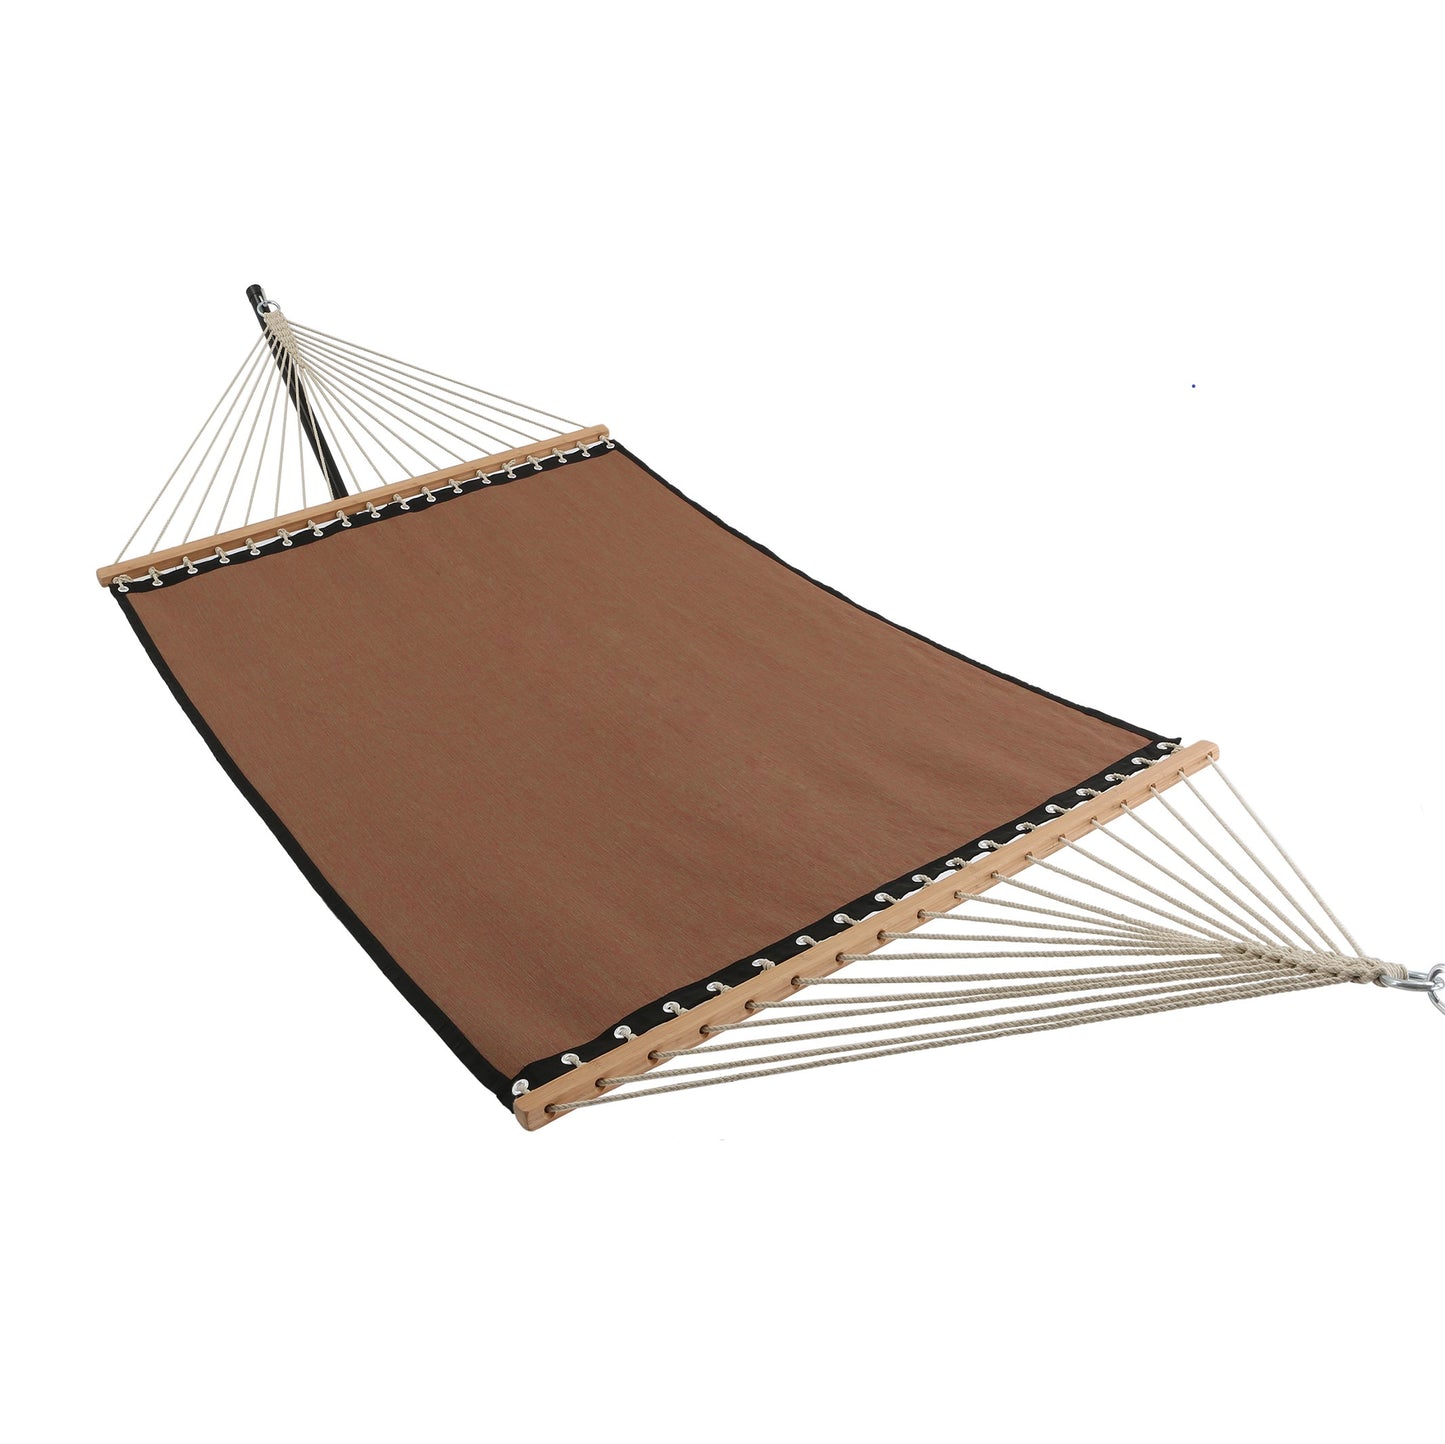 Patio watcher 11 FT quick dry hammock with olifin